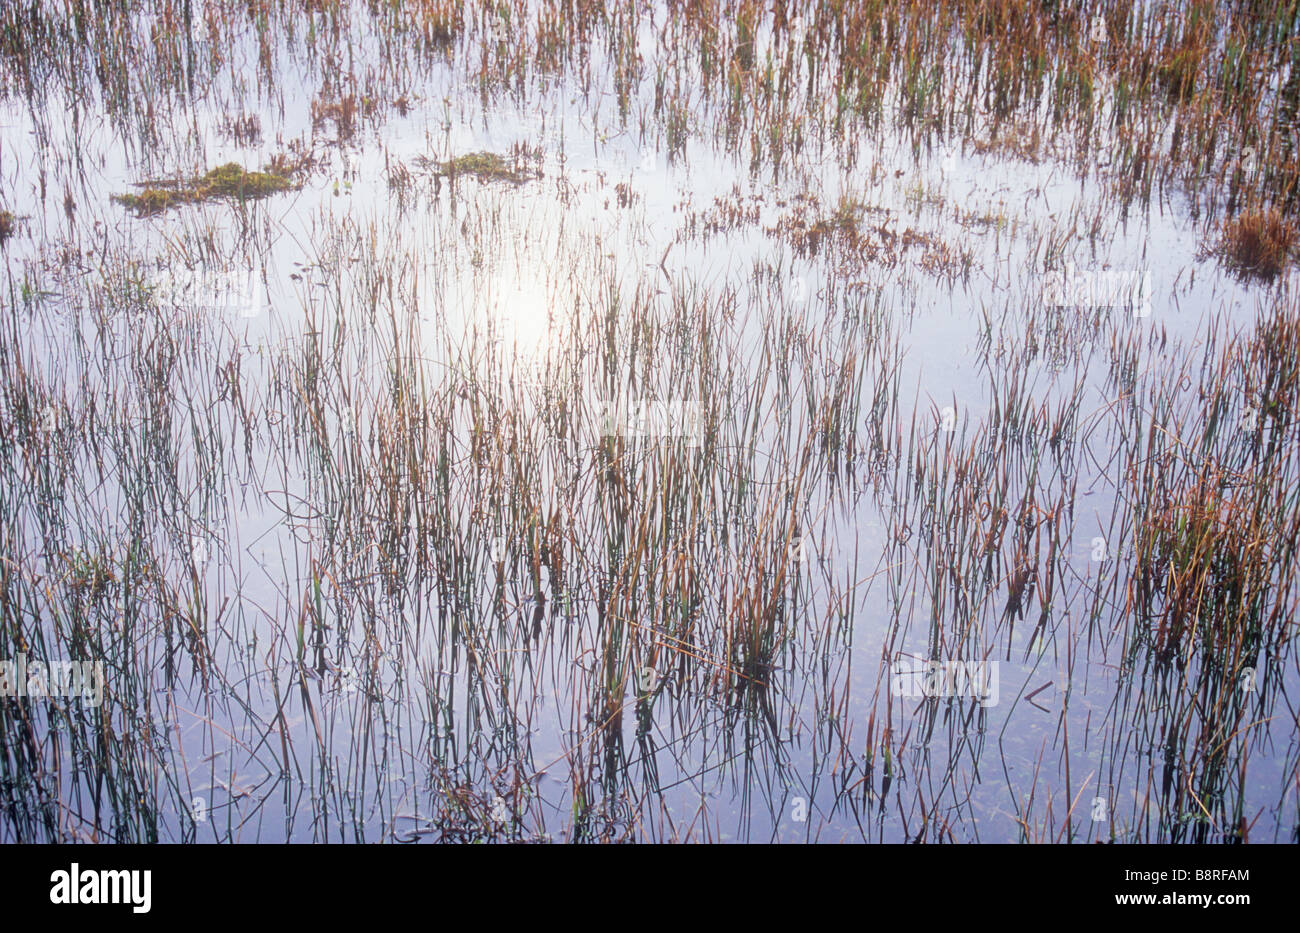 Green and golden blades of Common sedge poking up through waterlogged bog reflecting silver white winter sky Stock Photo